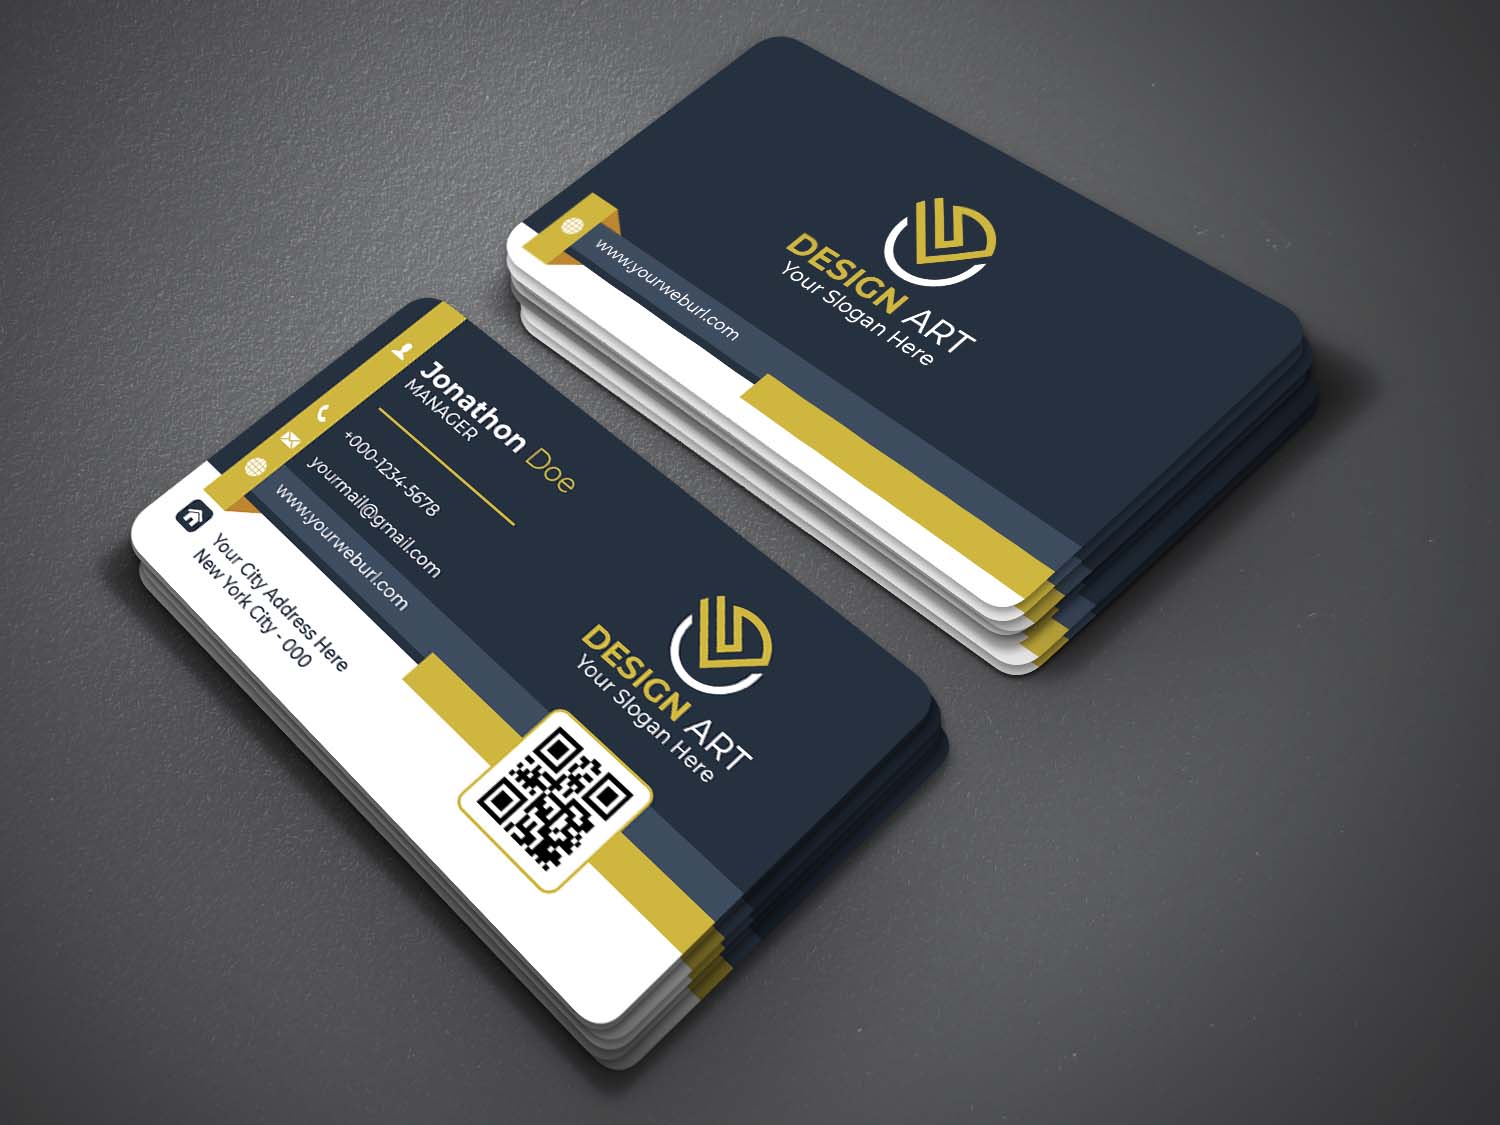 Two business cards with a yellow and blue design.